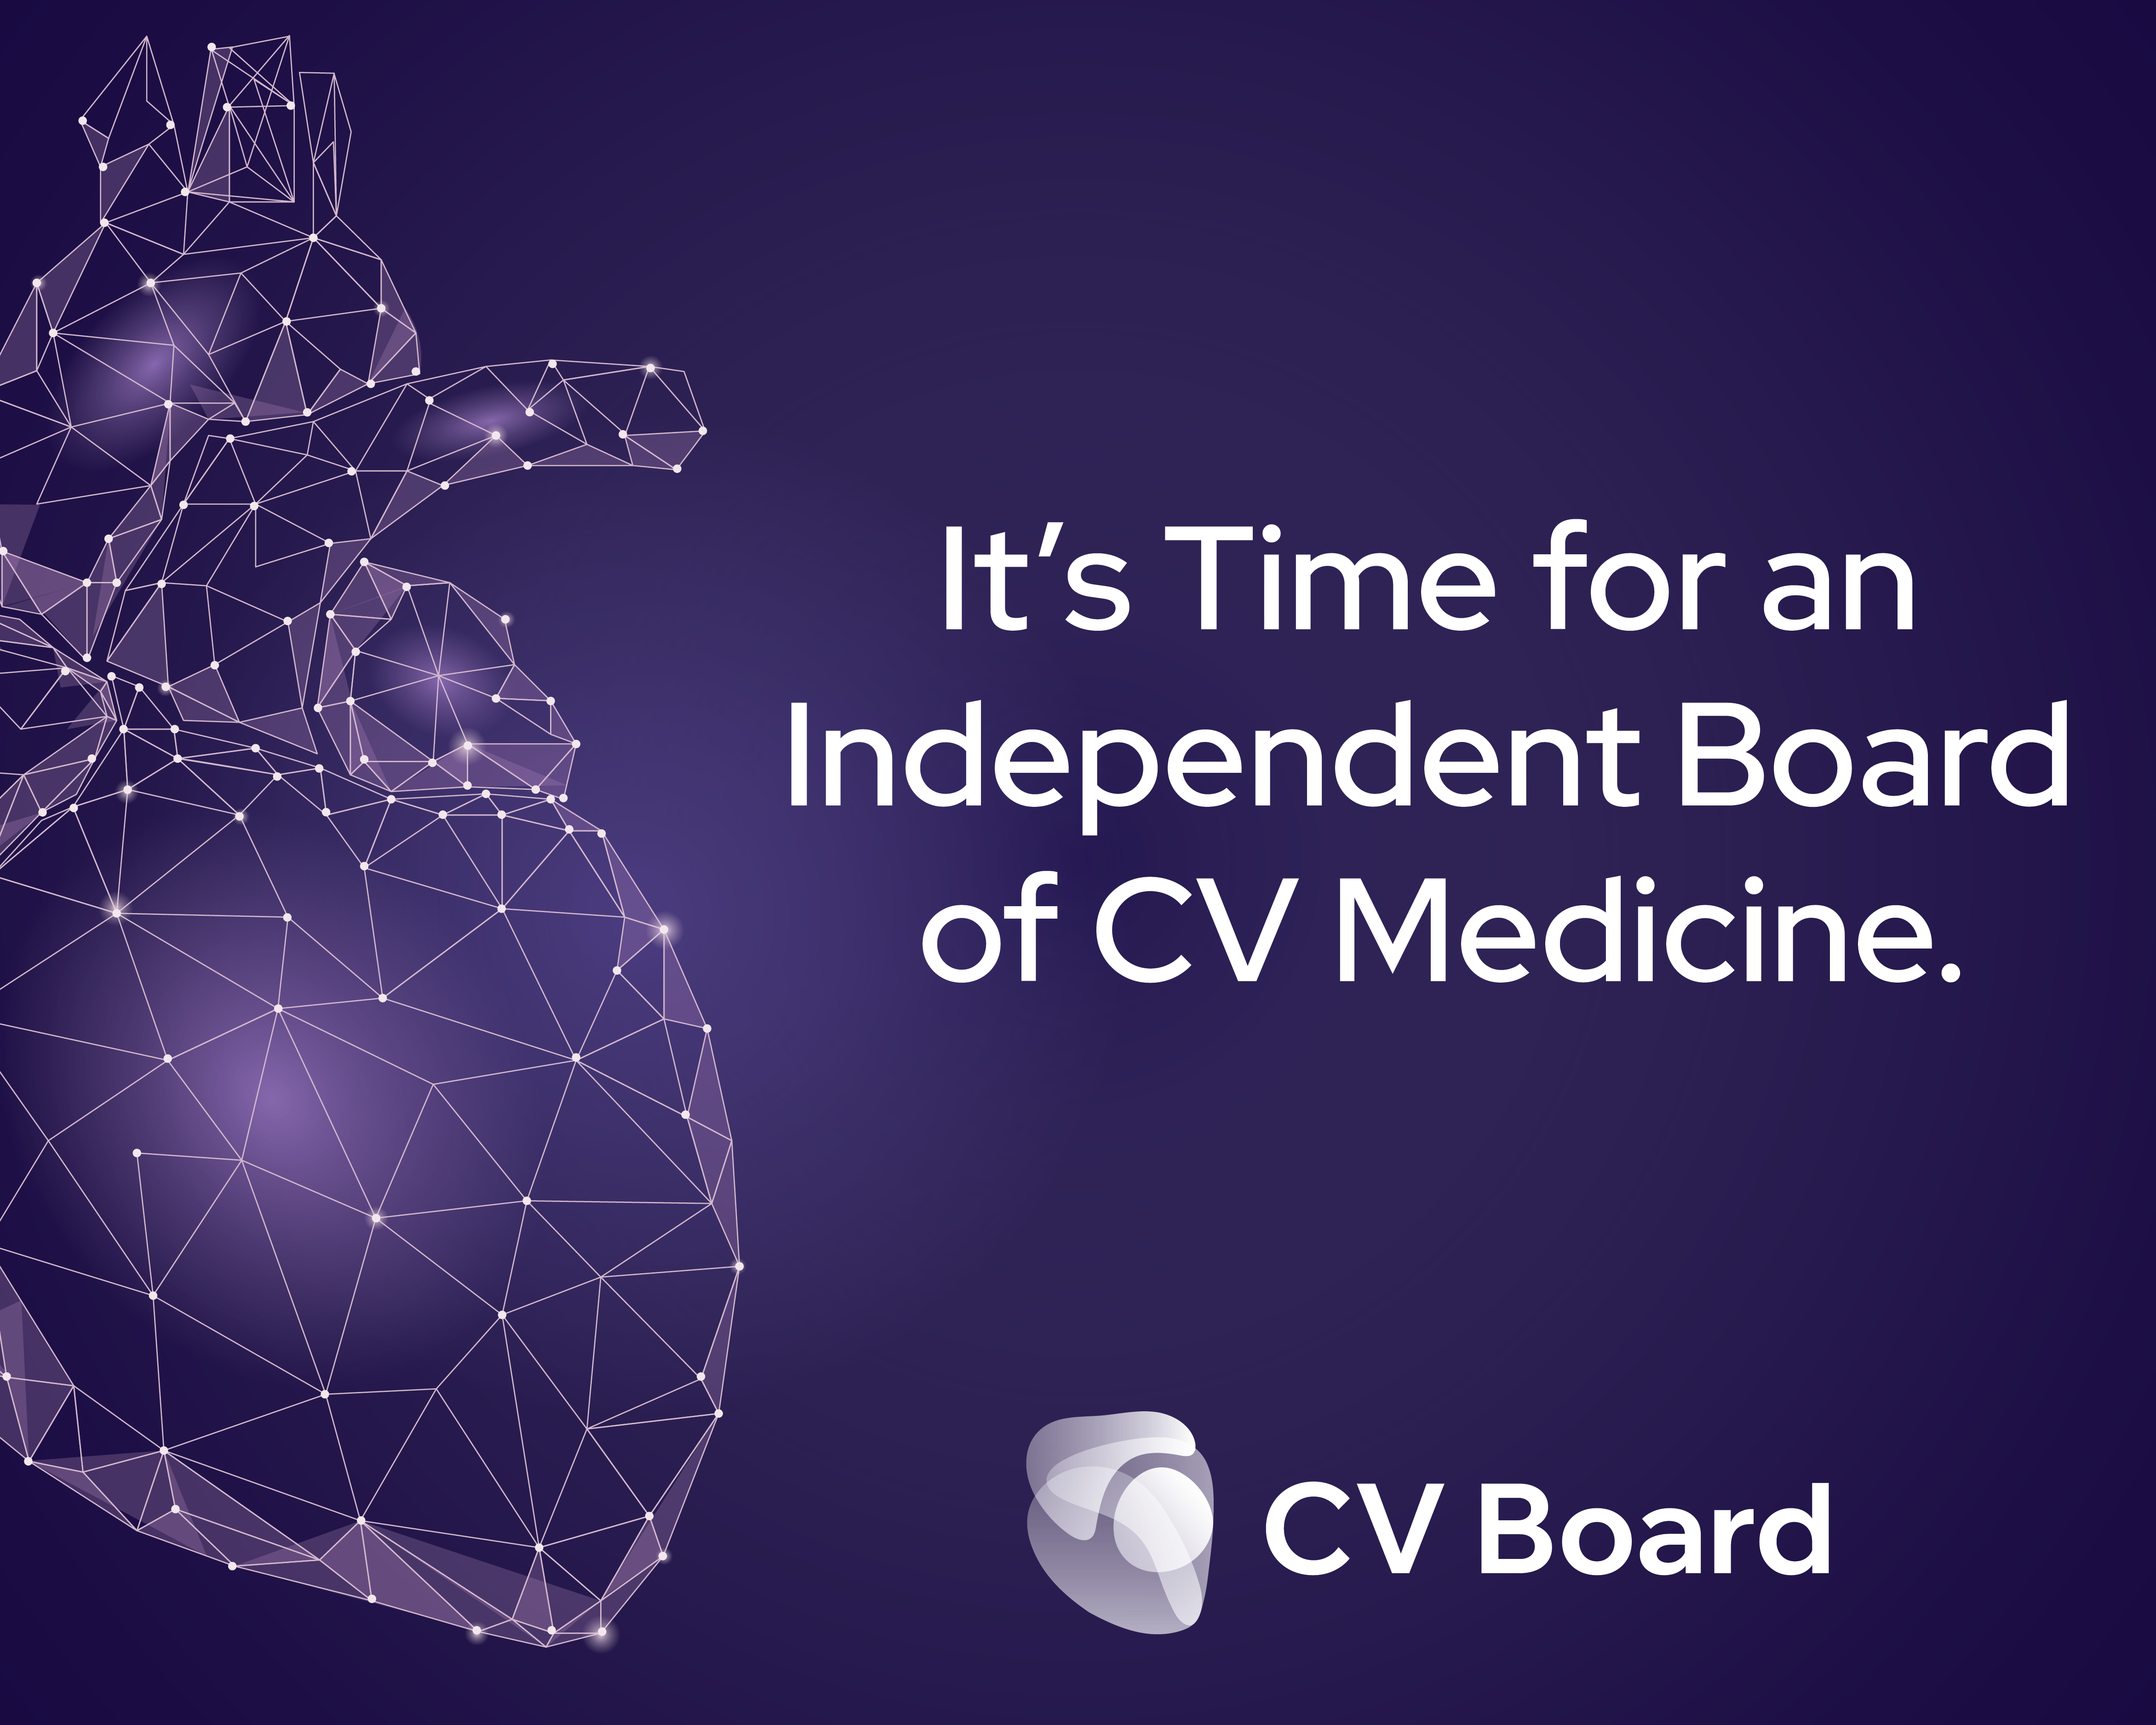 Joint Society Leadership Page Makes the Case For a New CV Board of Medicine